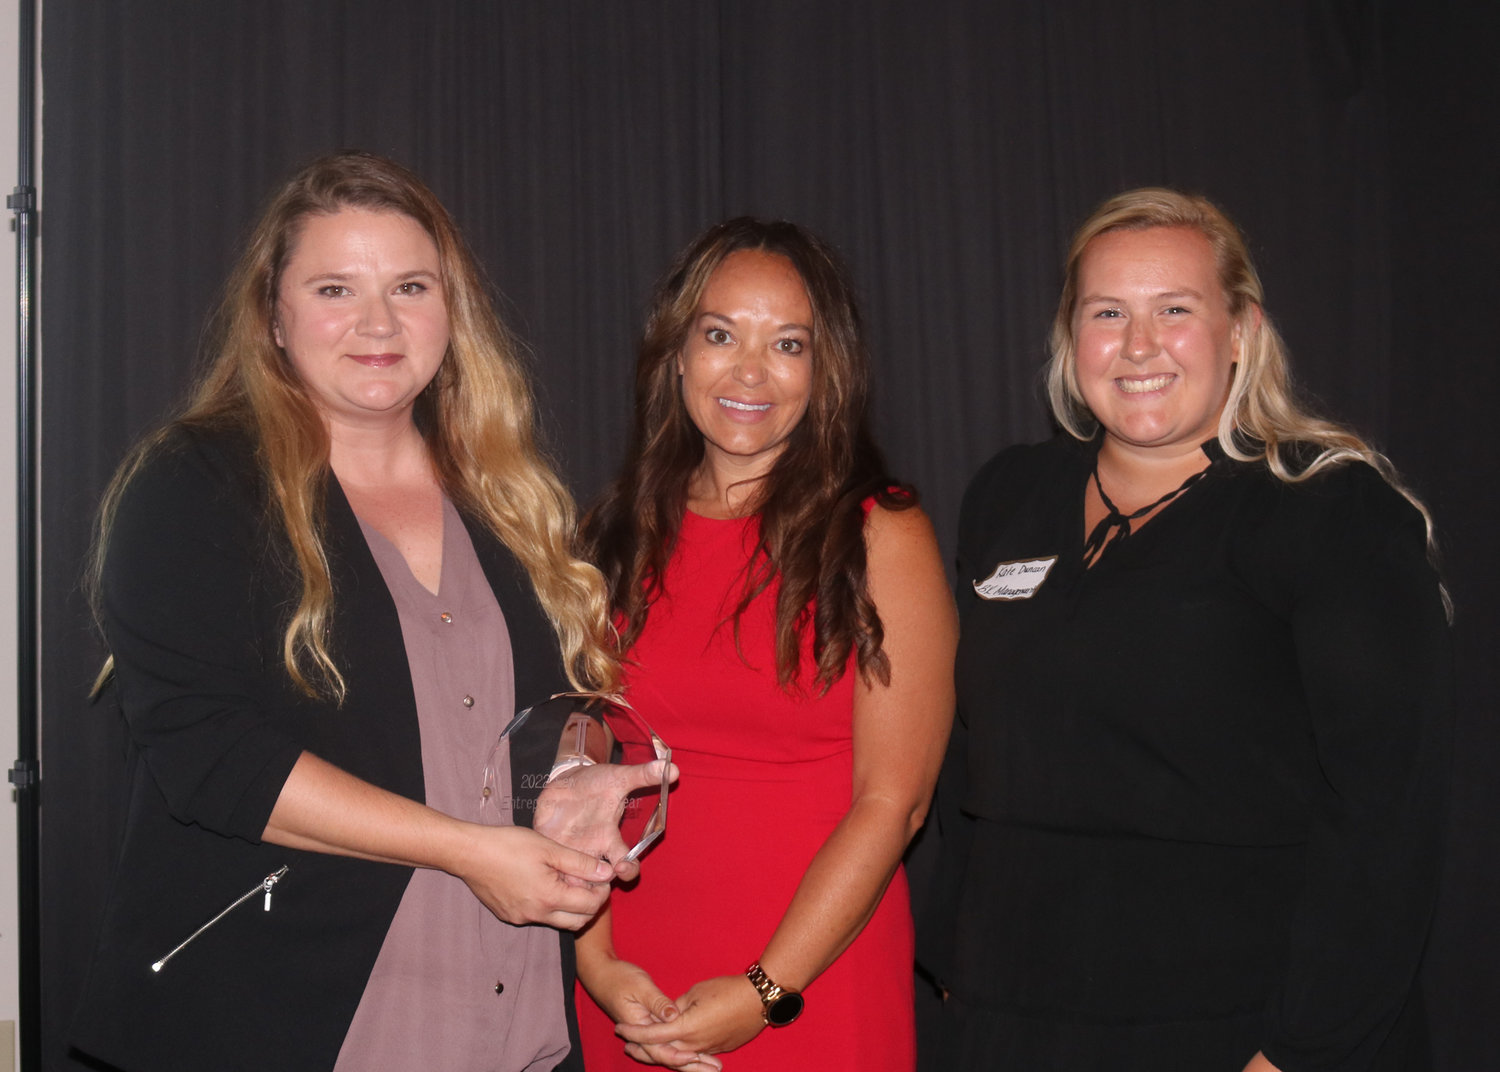 Jessica Harris, left, of Shop Small Shop Handmade of Linden was named the Lew Wallace Entrepreneur of the Year. She is pictured with Alissa Morlan, center, and Kate Duncan, right.